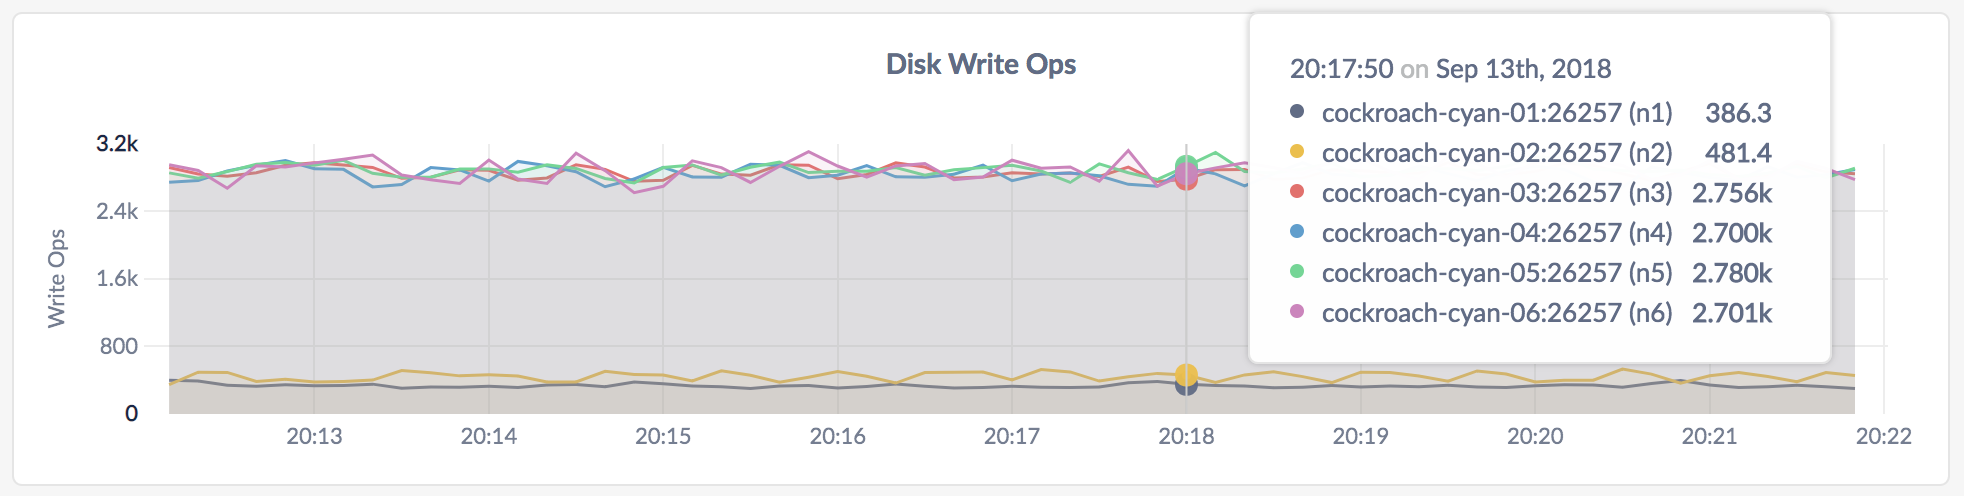 DB Console Disk Write Ops graph